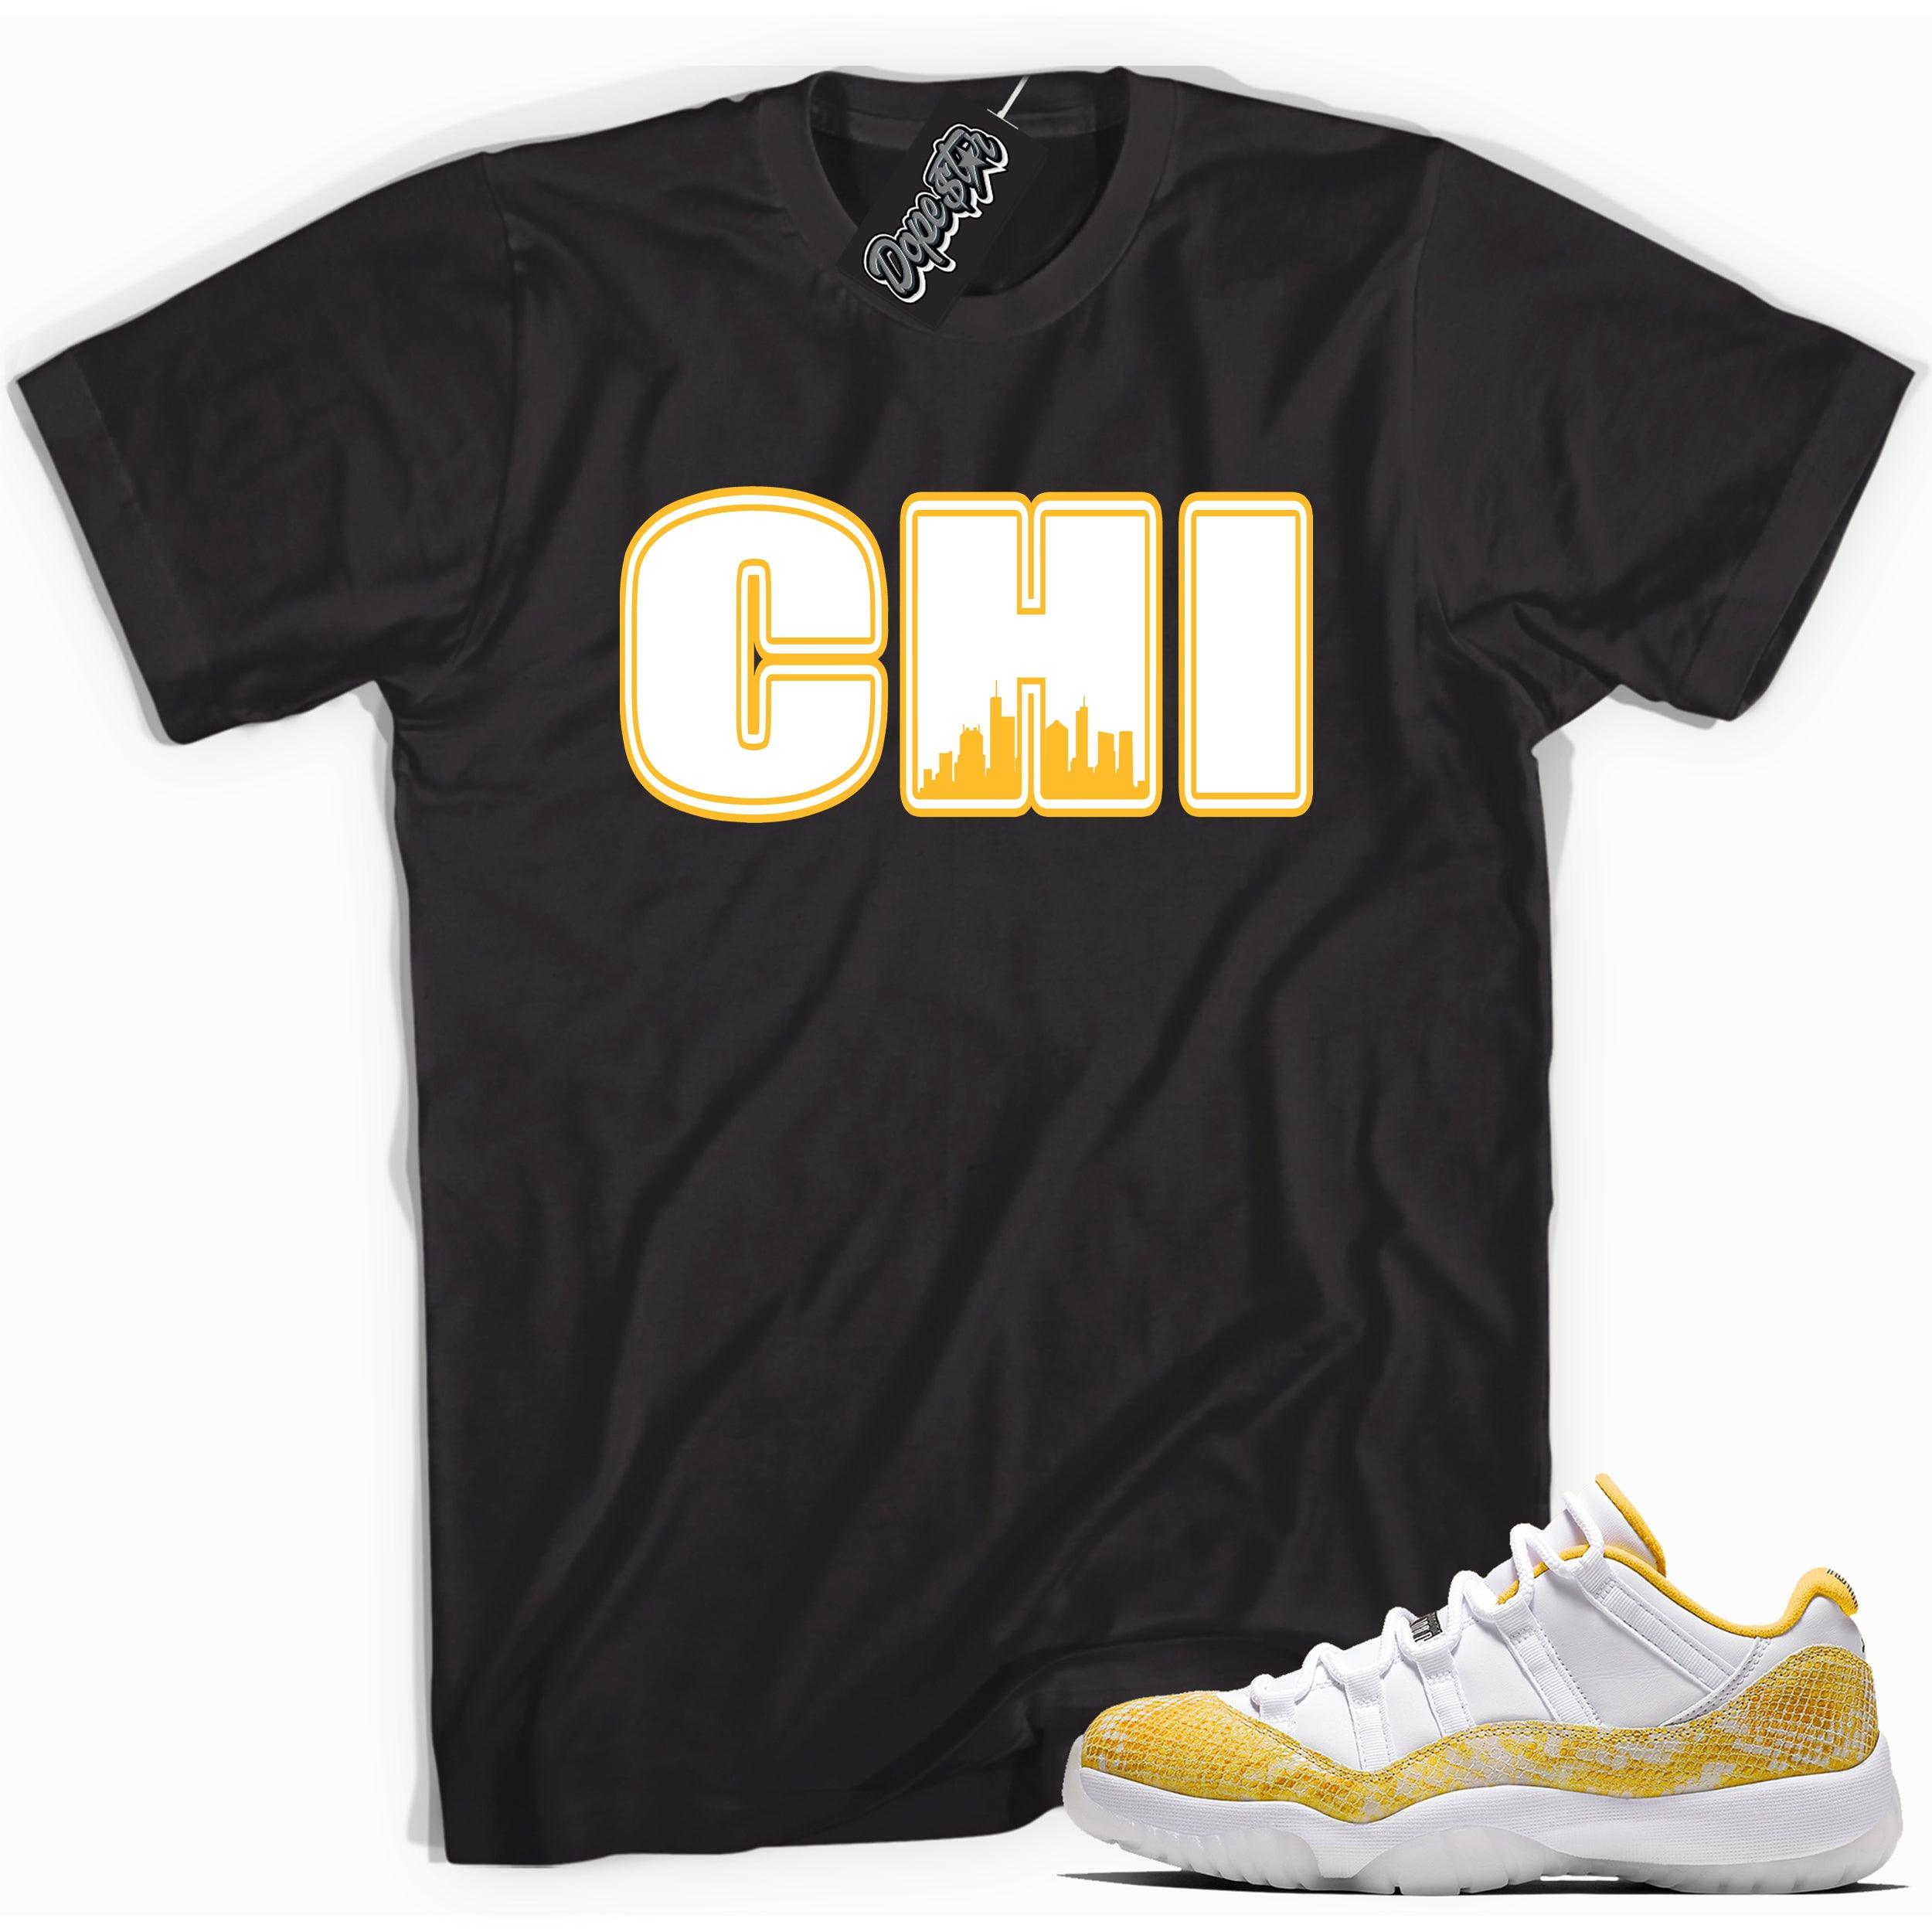 Cool black graphic tee with 'CHI' print, that perfectly matches  Air Jordan 11 Low Yellow Snakeskin sneakers